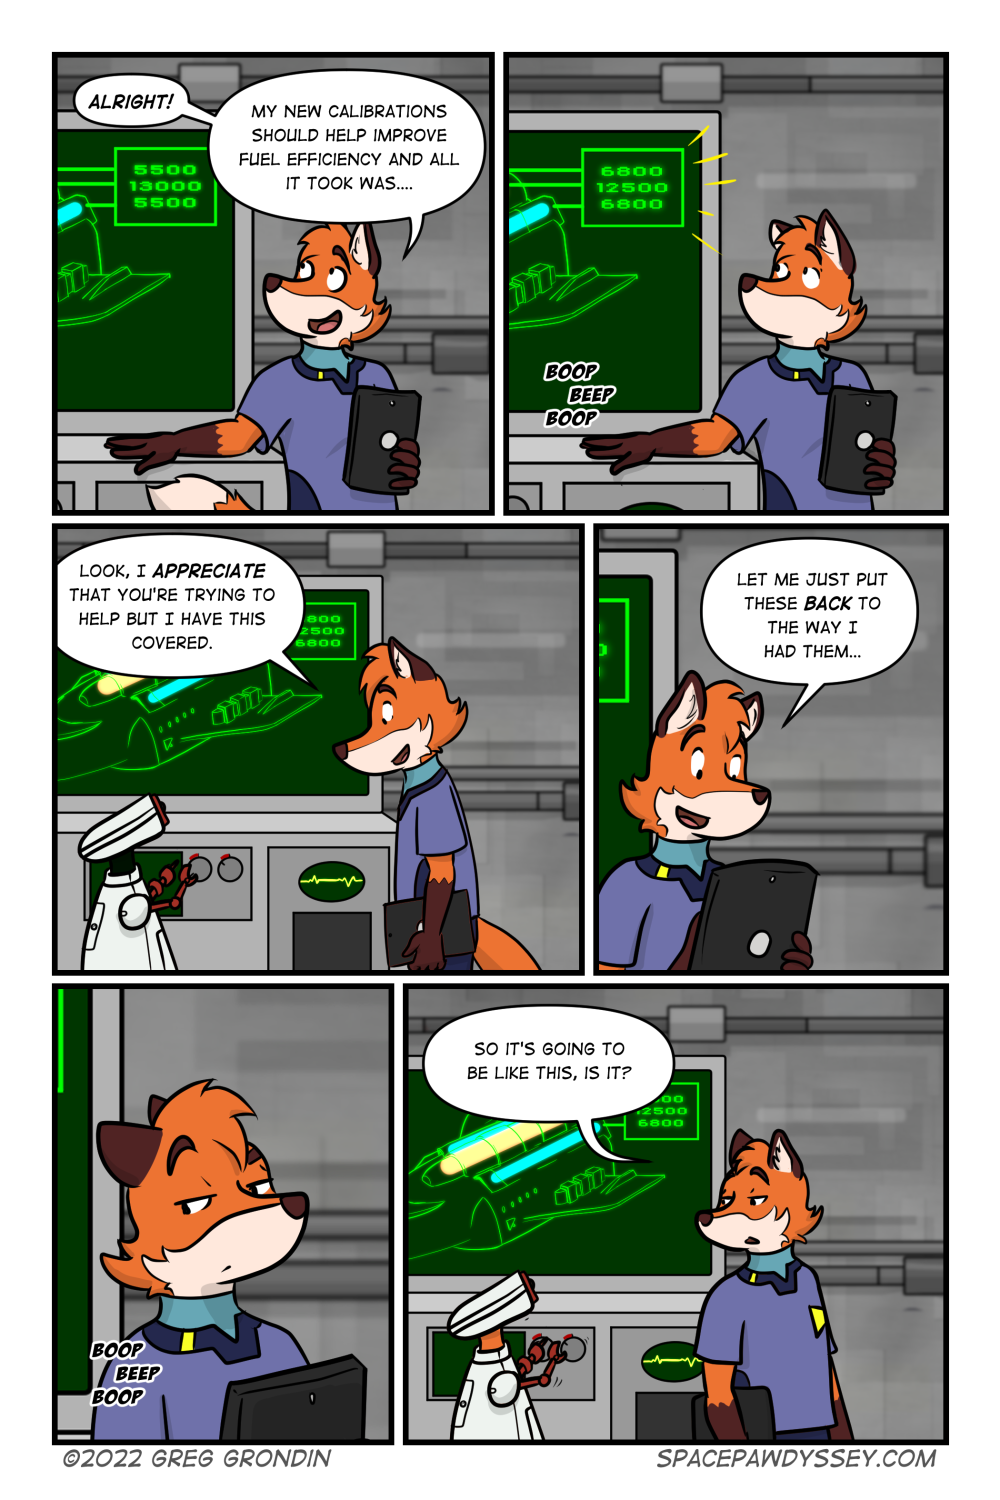 Space Pawdyssey #580